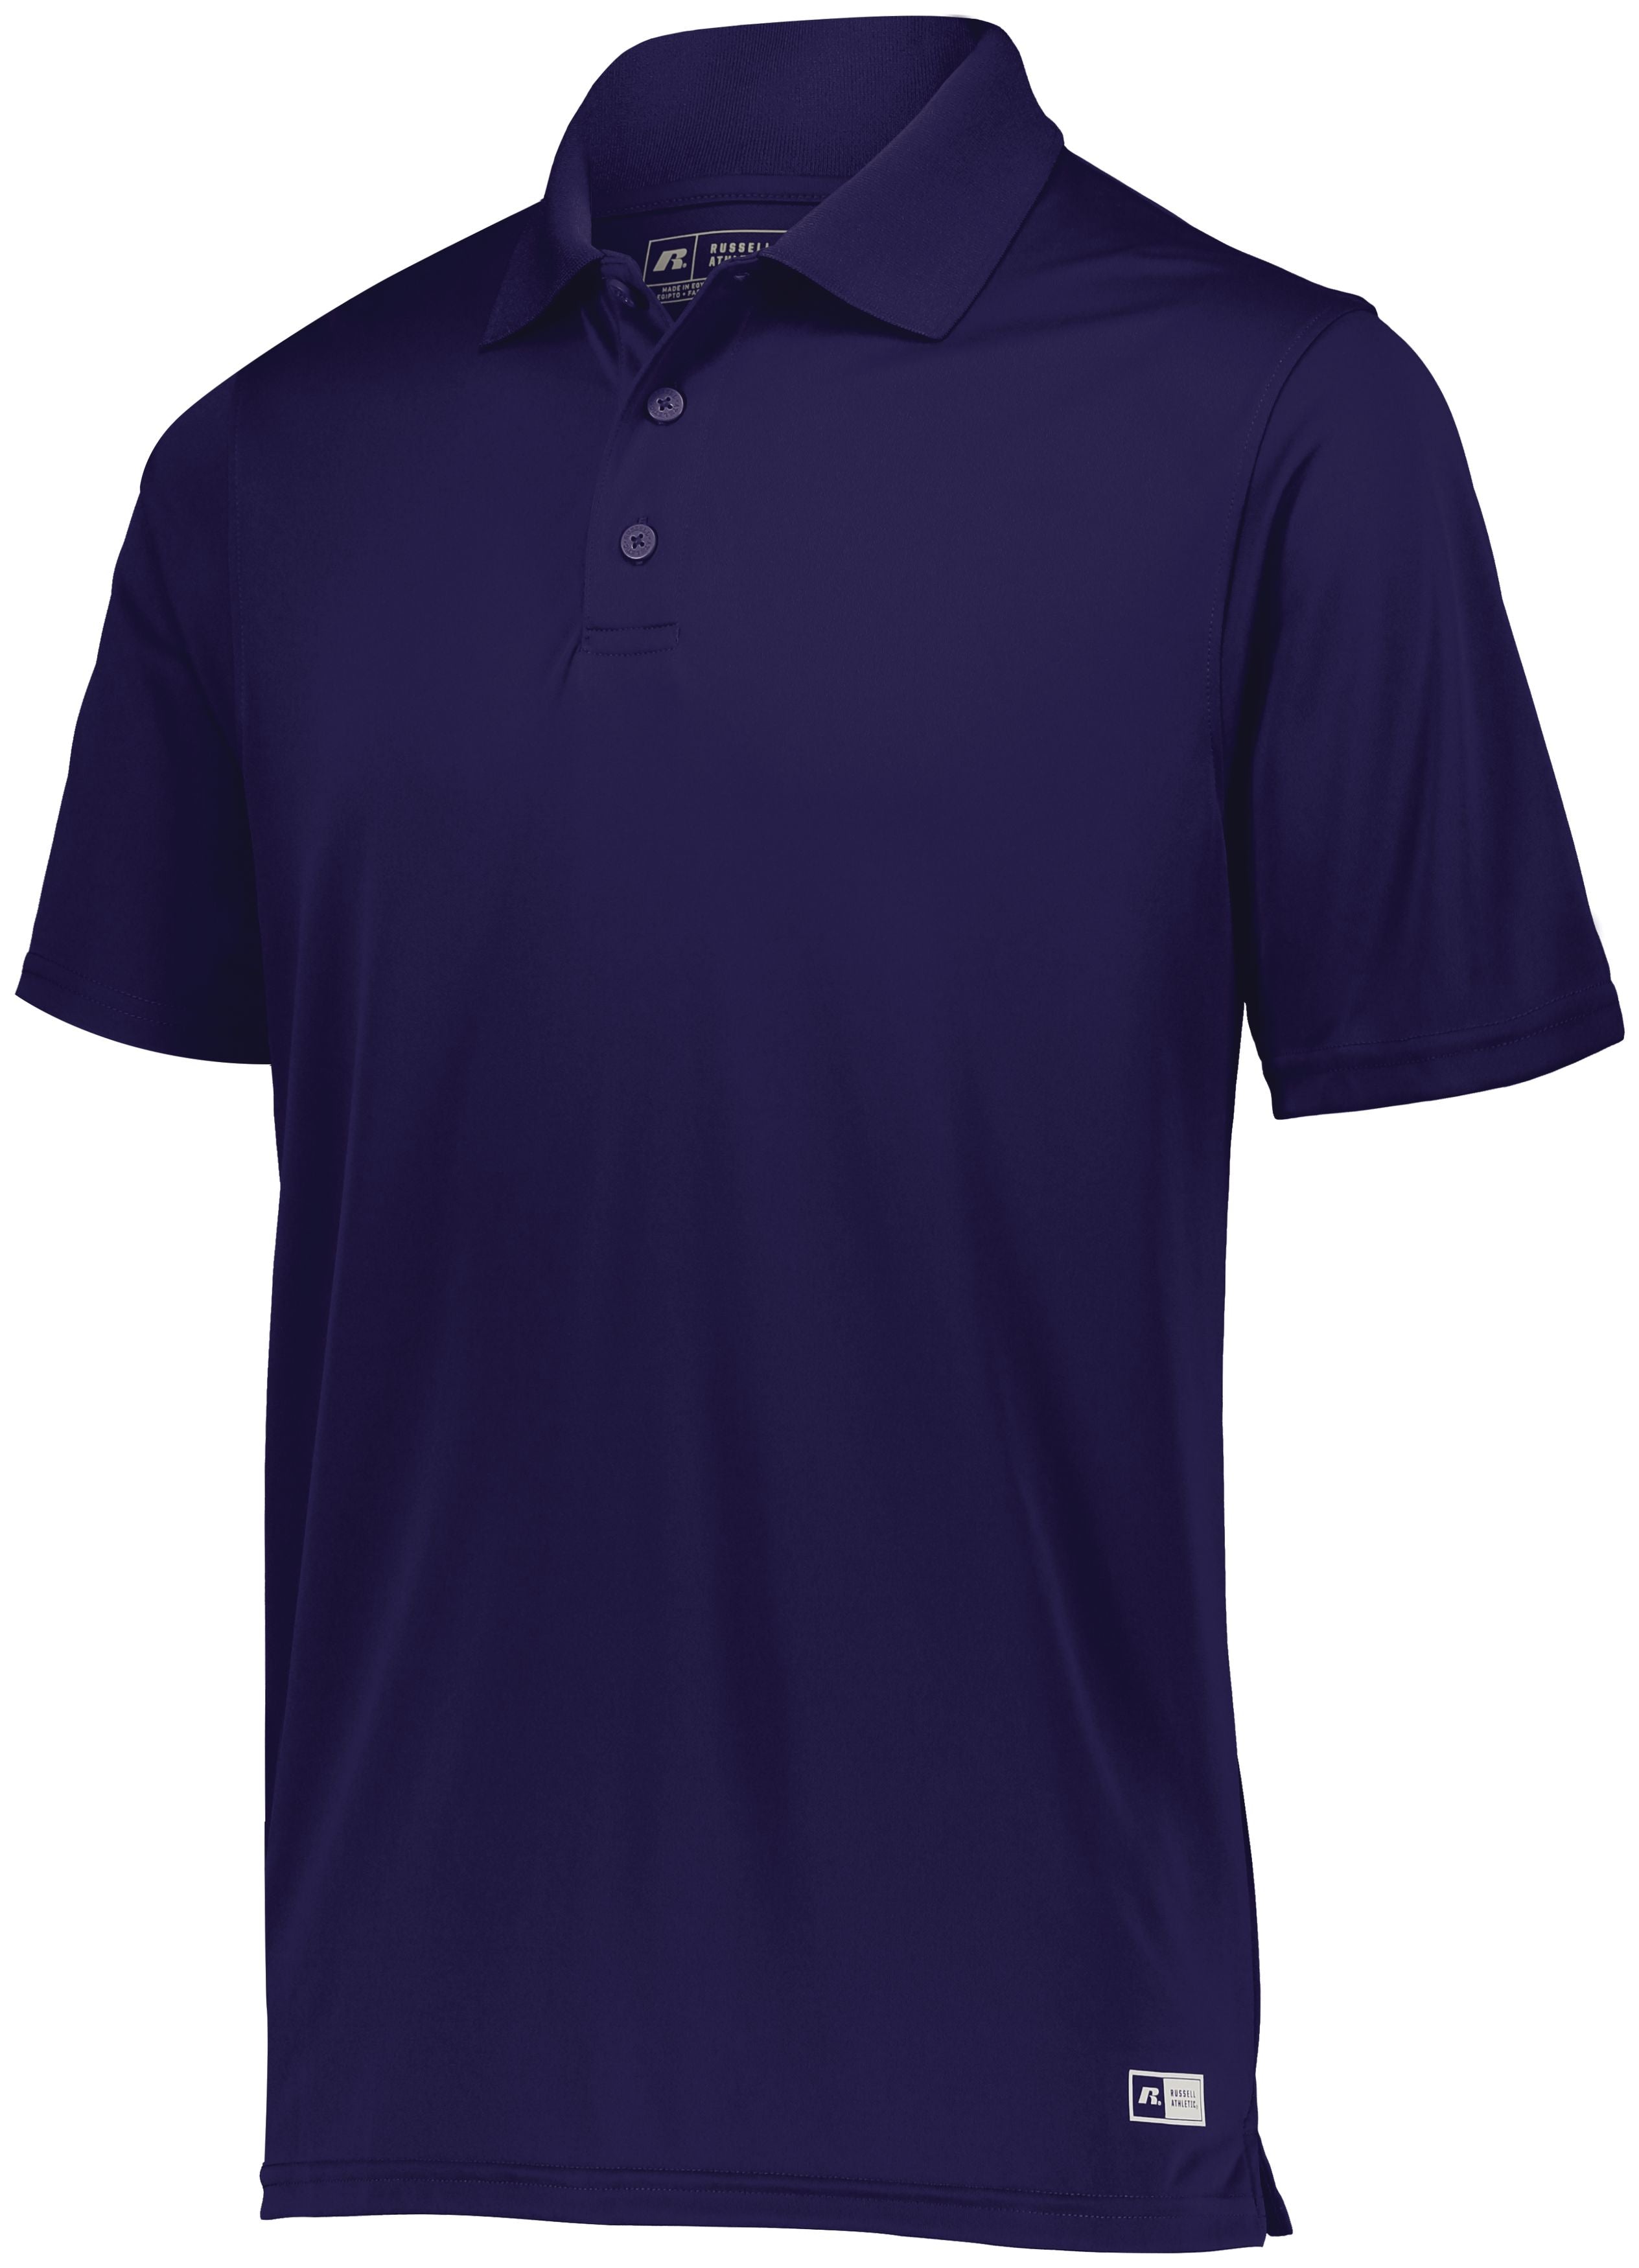 Russell Athletic Essential Polo in Purple  -Part of the Adult, Adult-Polos, Polos, Russell-Athletic-Products, Shirts, Corporate-Collection product lines at KanaleyCreations.com